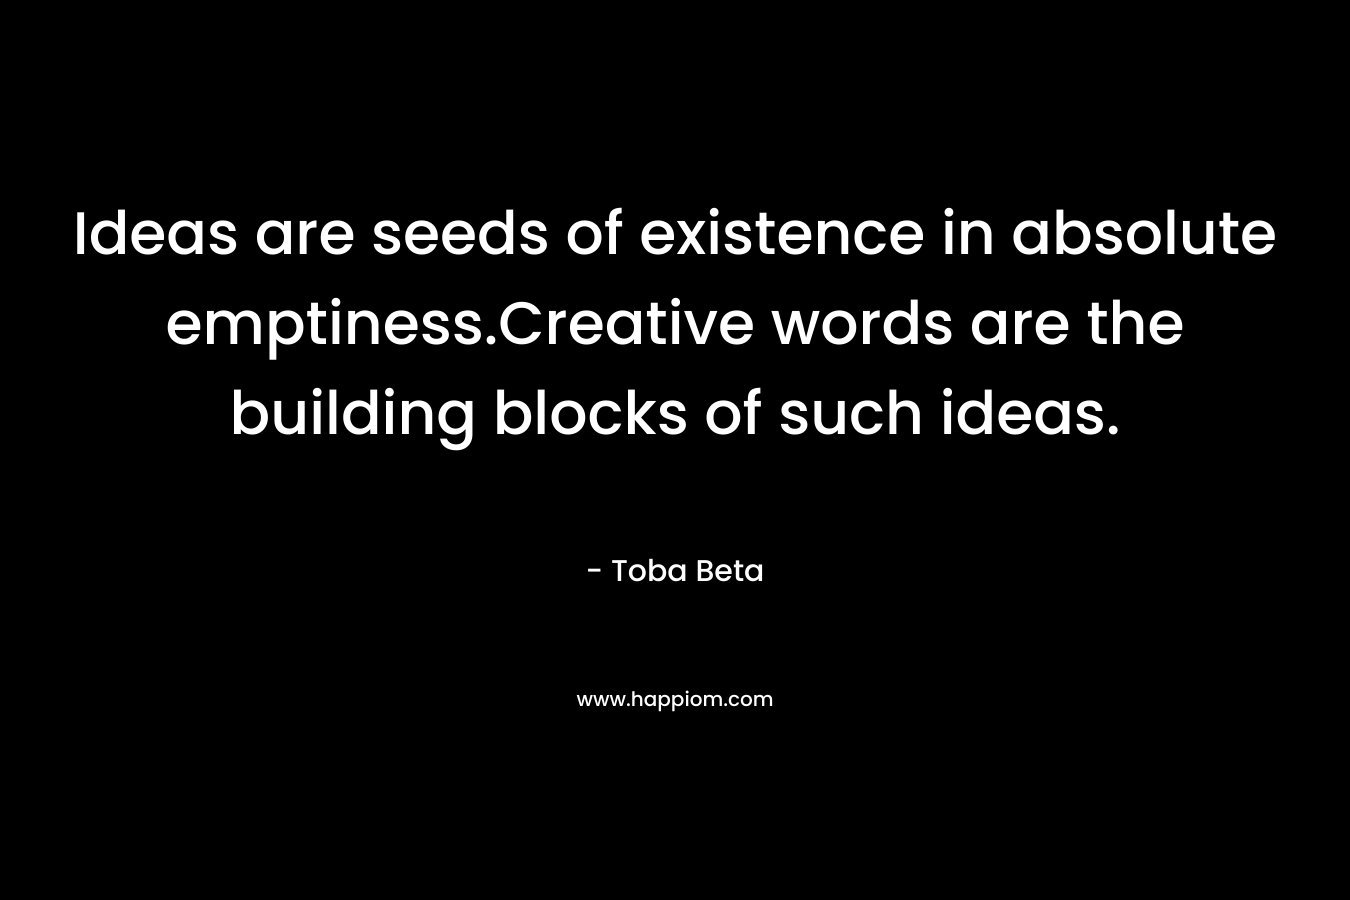 Ideas are seeds of existence in absolute emptiness.Creative words are the building blocks of such ideas. – Toba Beta